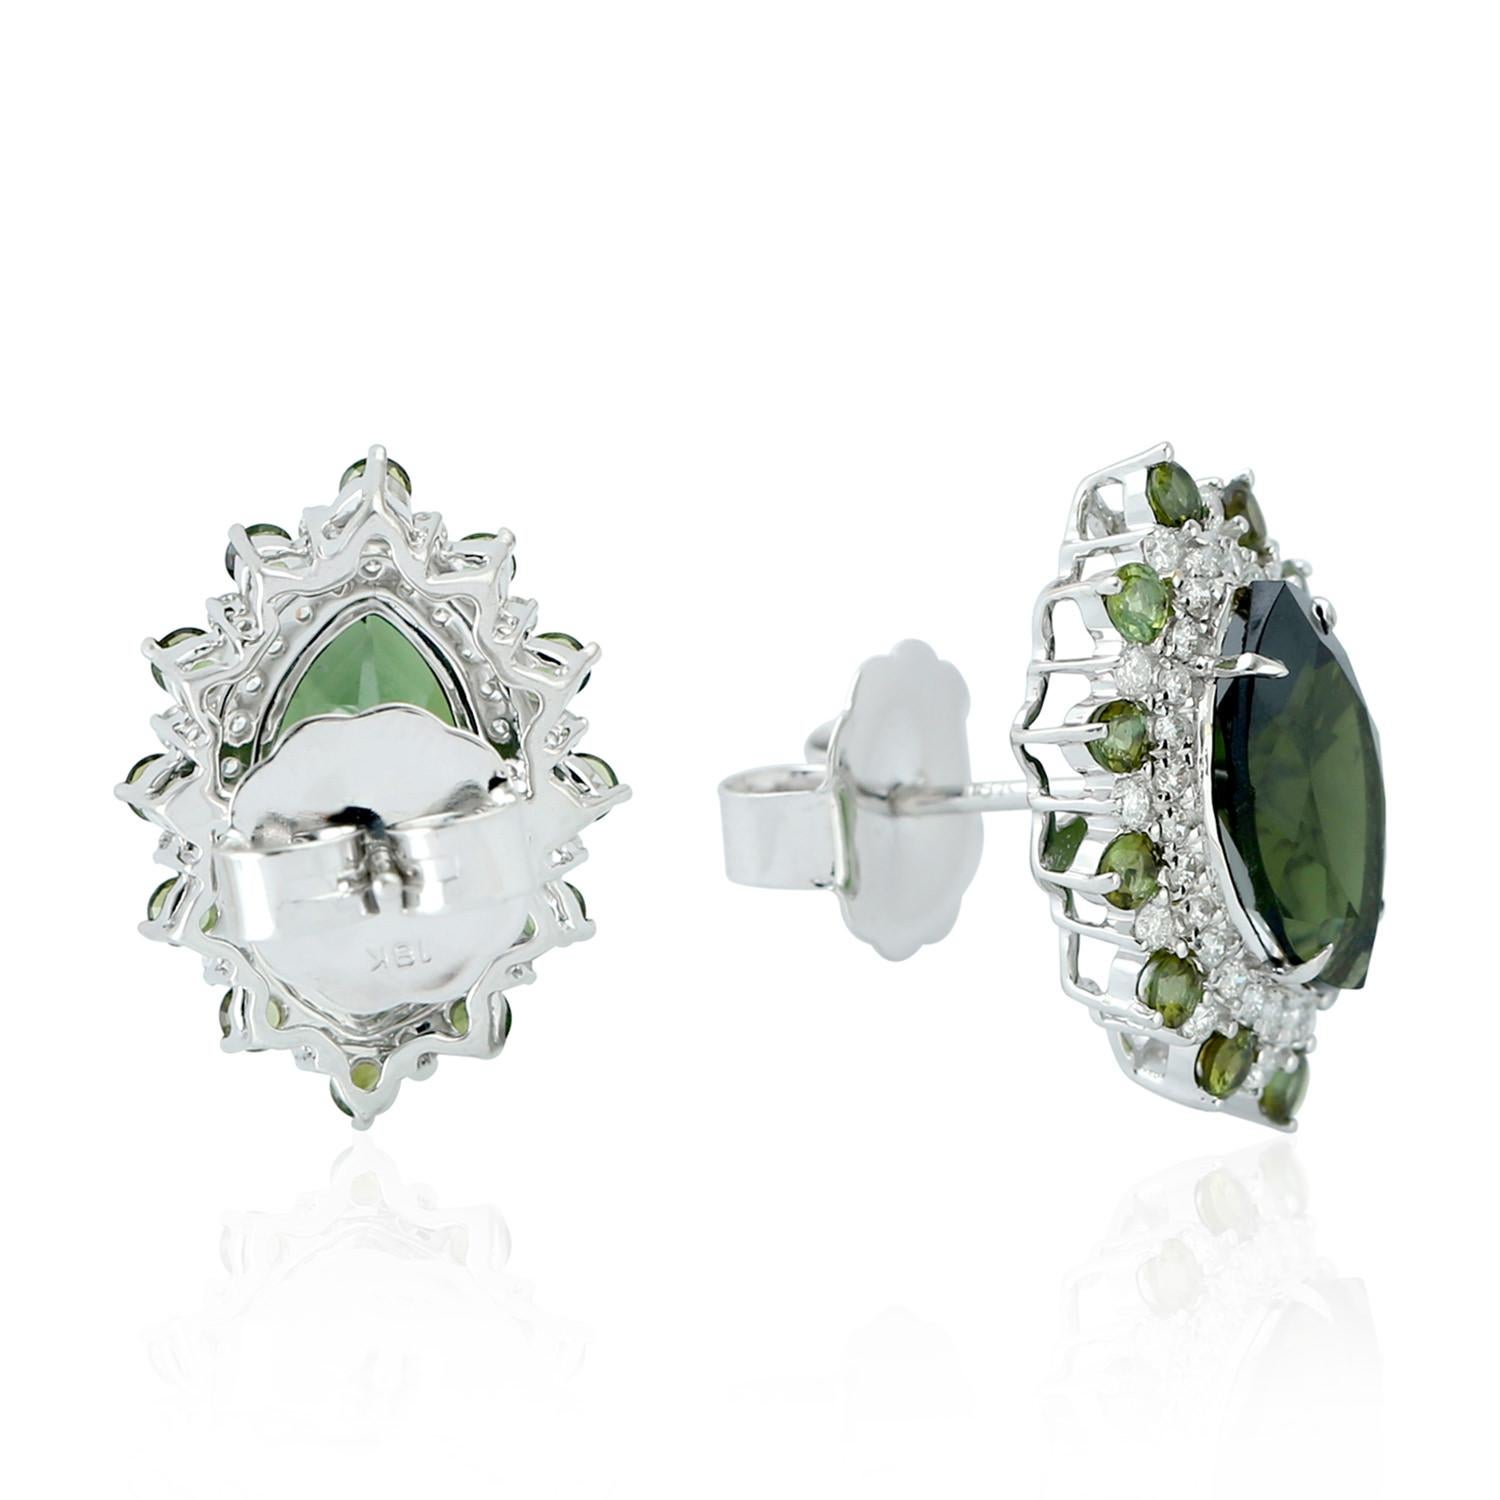 Art Deco Marquise Shaped Green Tourmaline Studs With Diamonds Made In 18k White Gold For Sale